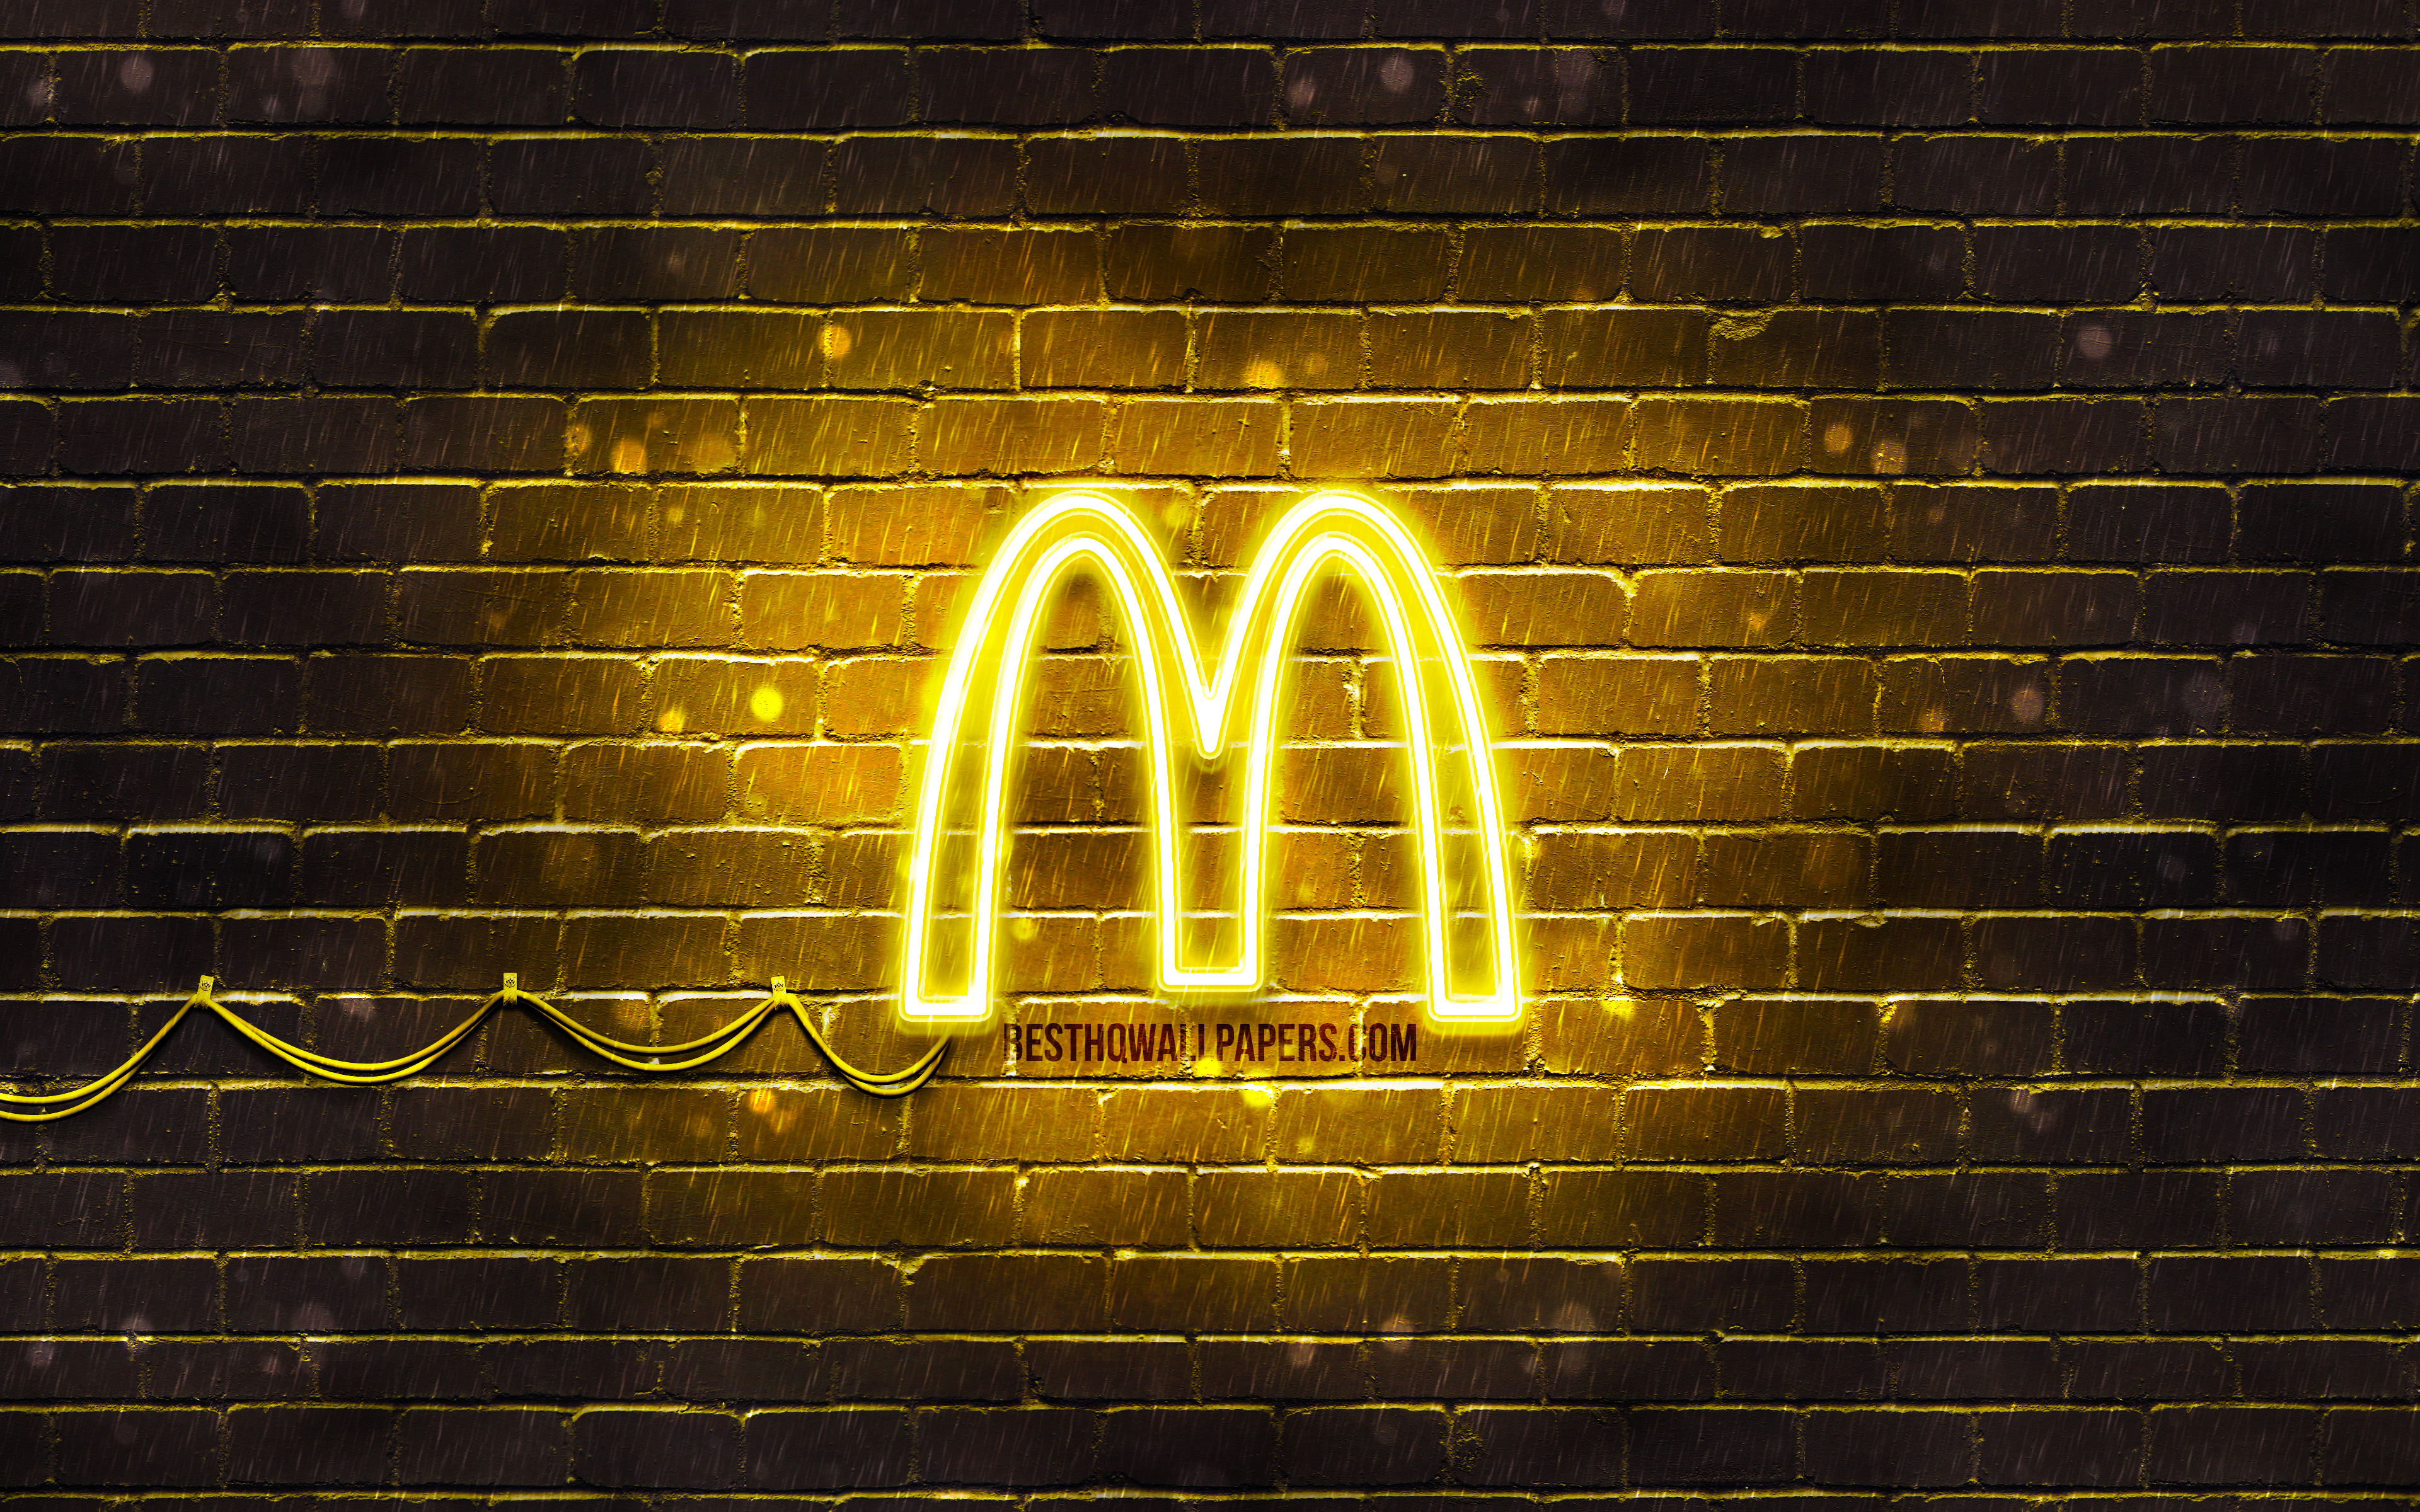 Download wallpaper McDonalds yellow logo, 4k, yellow brickwall, McDonalds logo, brands, McDonalds neon logo, McDonalds for desktop with resolution 3840x2400. High Quality HD picture wallpaper